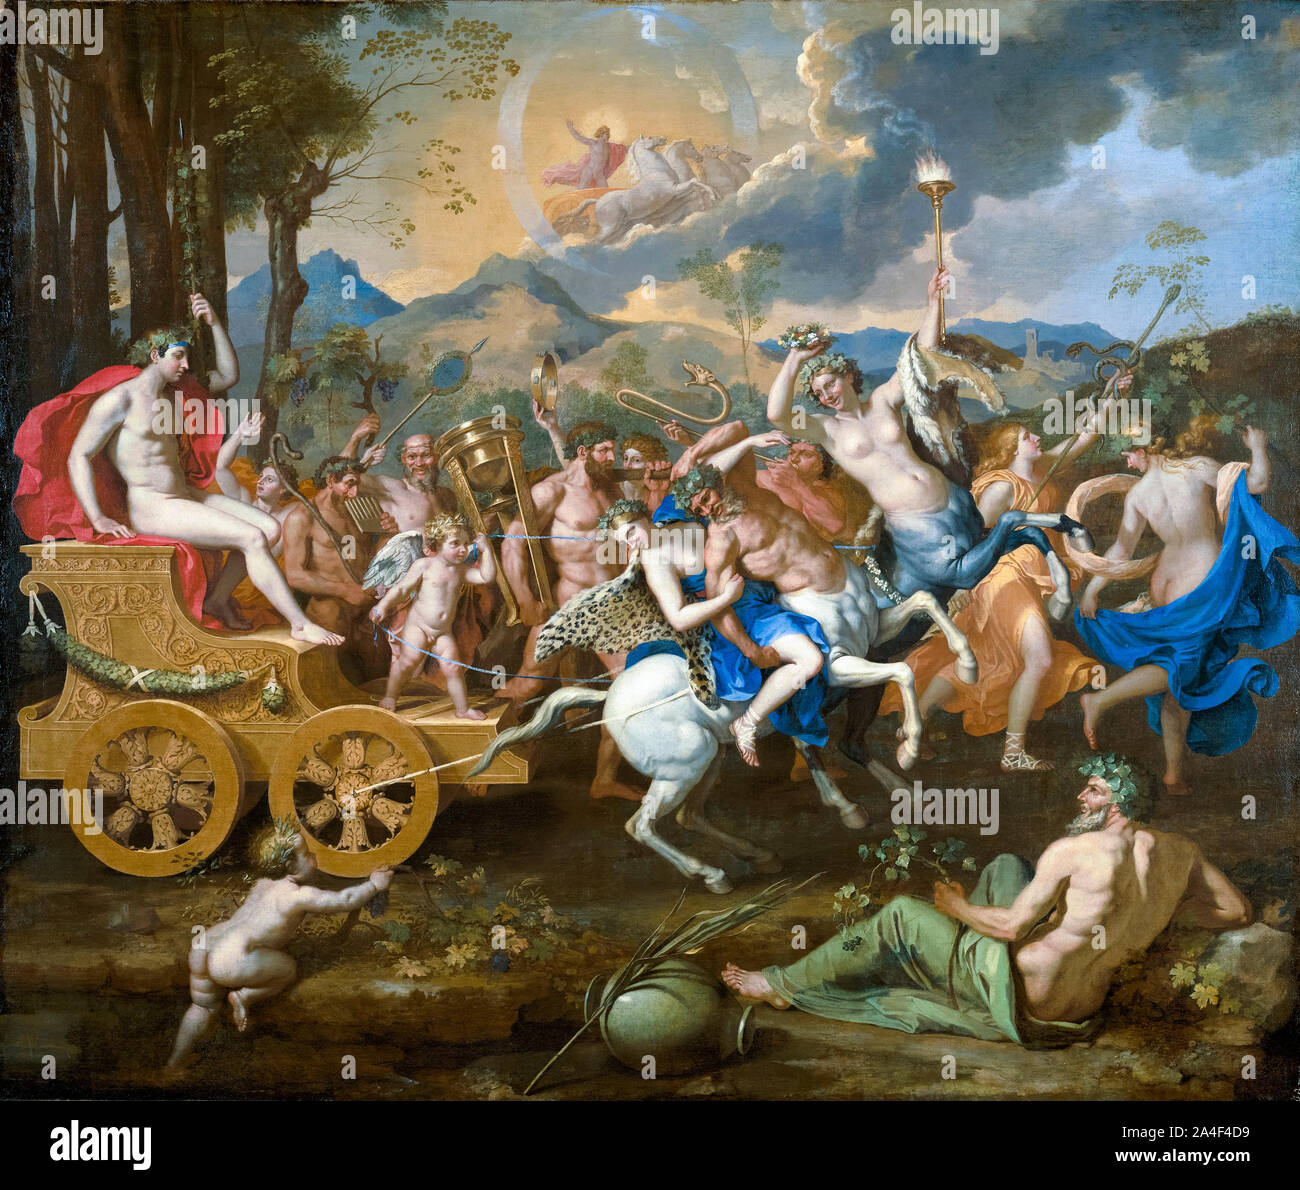 Nicolas Poussin, The Triumph of Bacchus, French Baroque painting, 1635-1636 Stock Photo